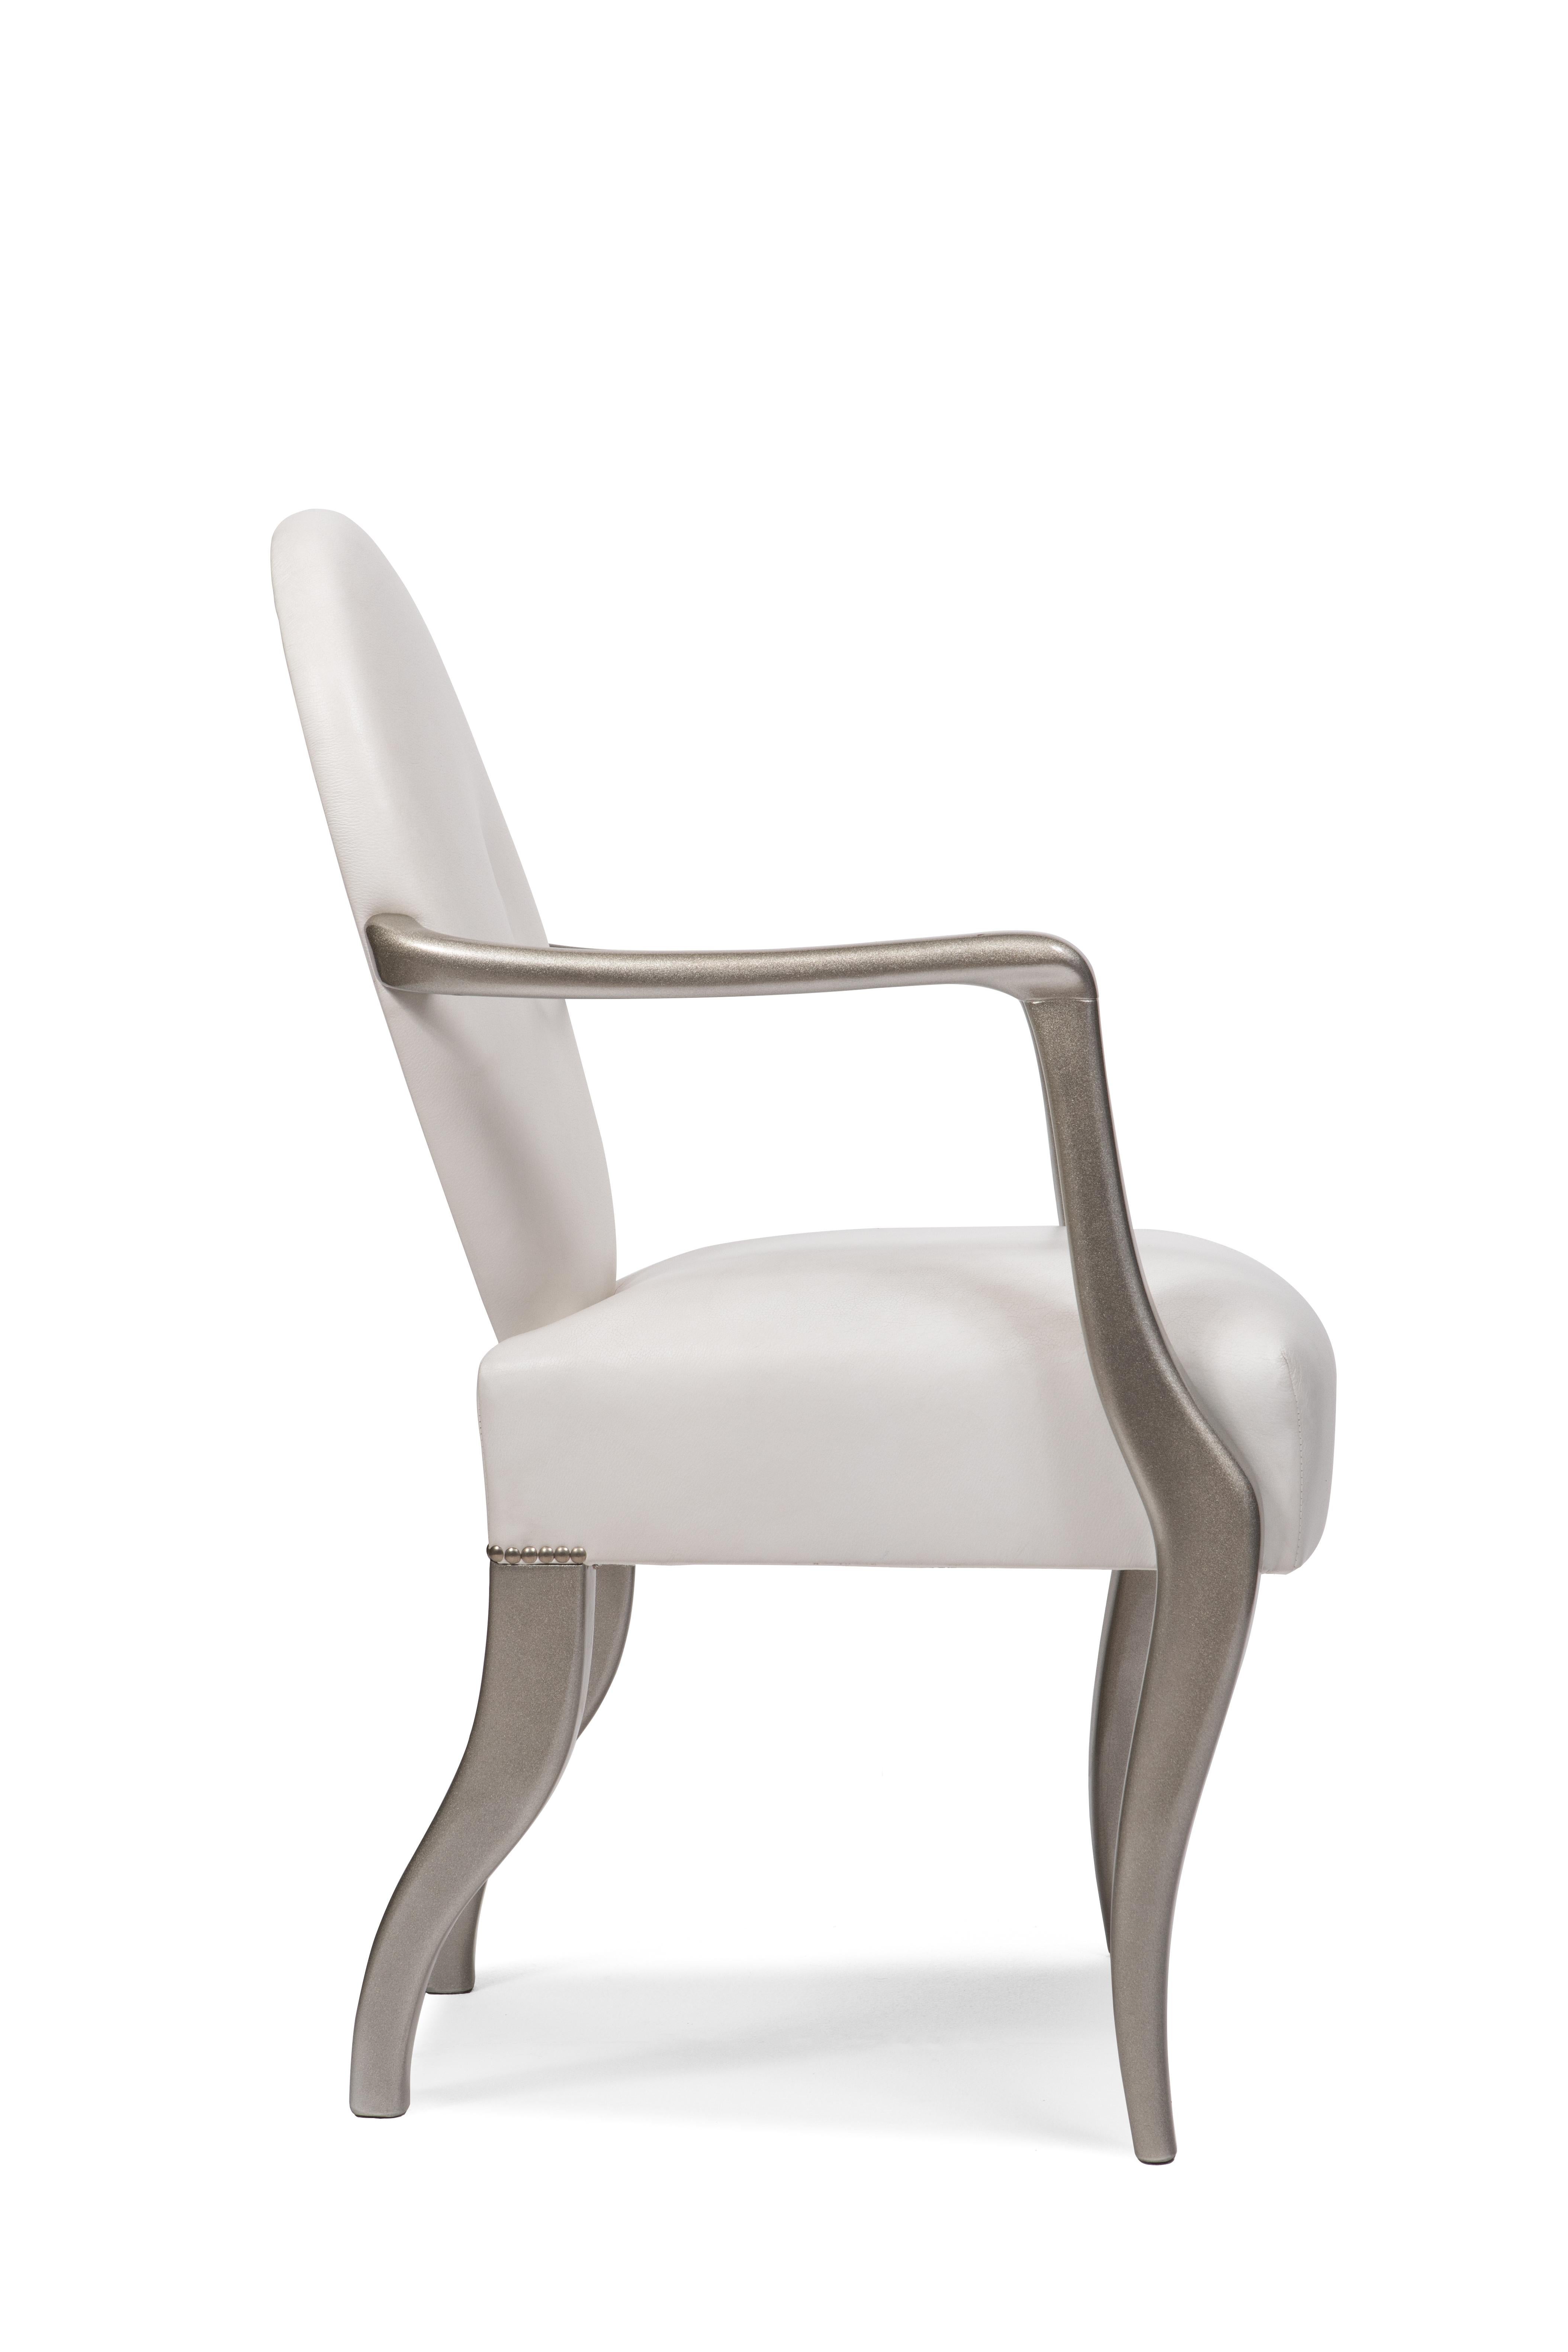 Modern Contemporary Chair with Armrests, Wood Frame, Made in Italy For Sale